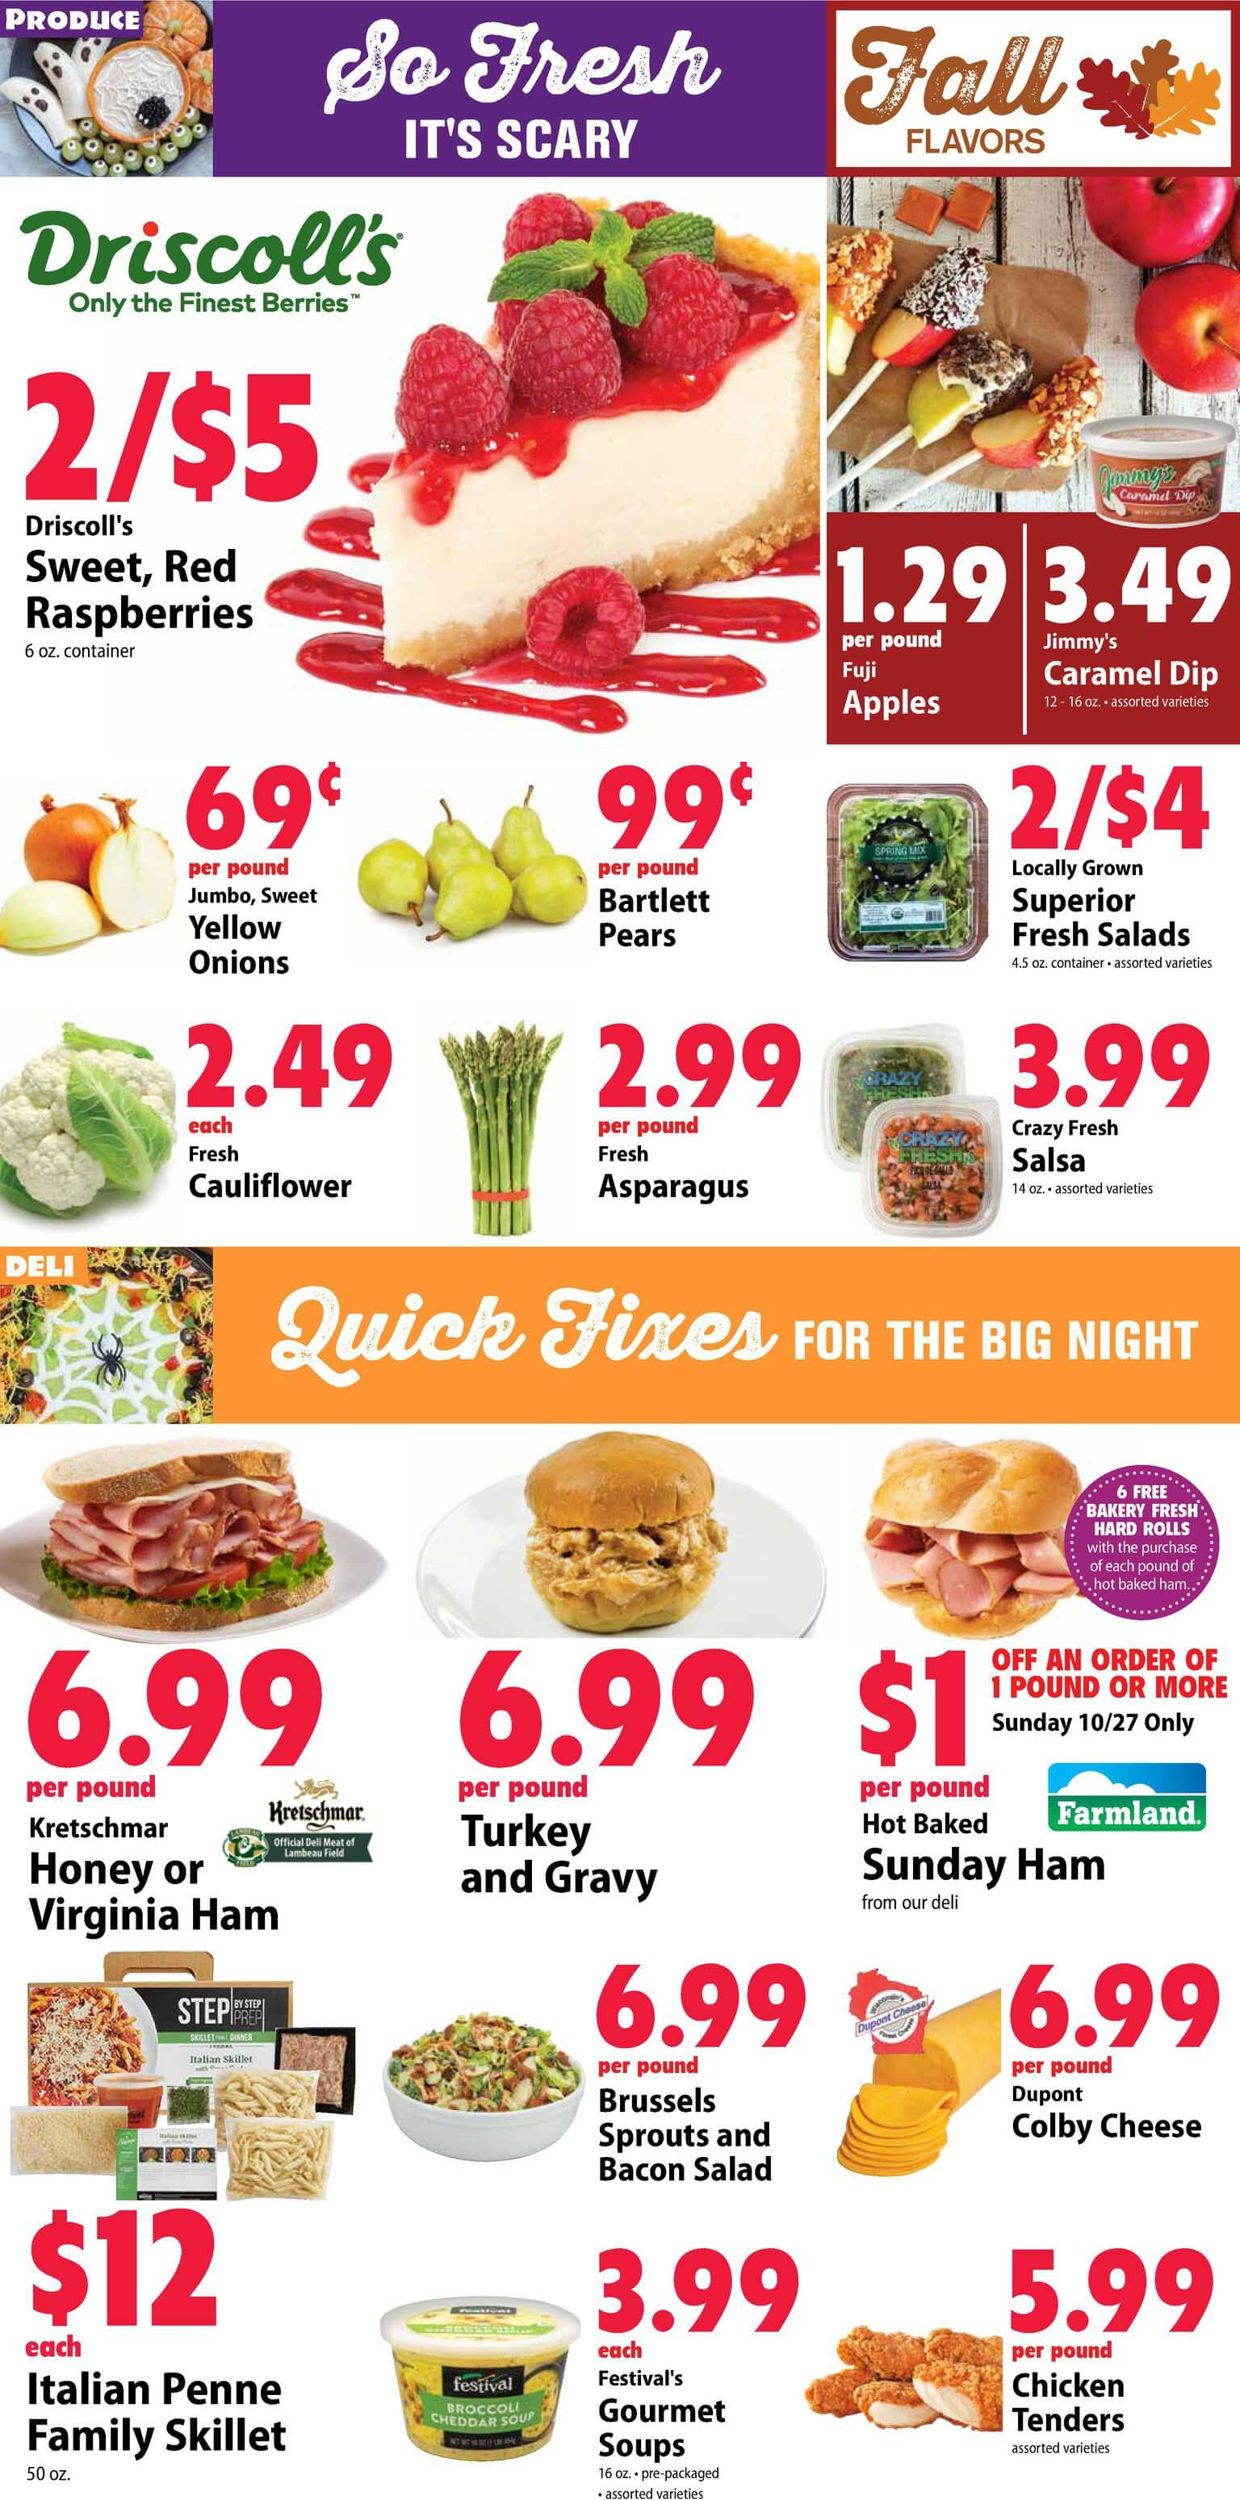 Festival Foods Current weekly ad 10/23 - 10/29/2019 [2] - frequent-ads.com